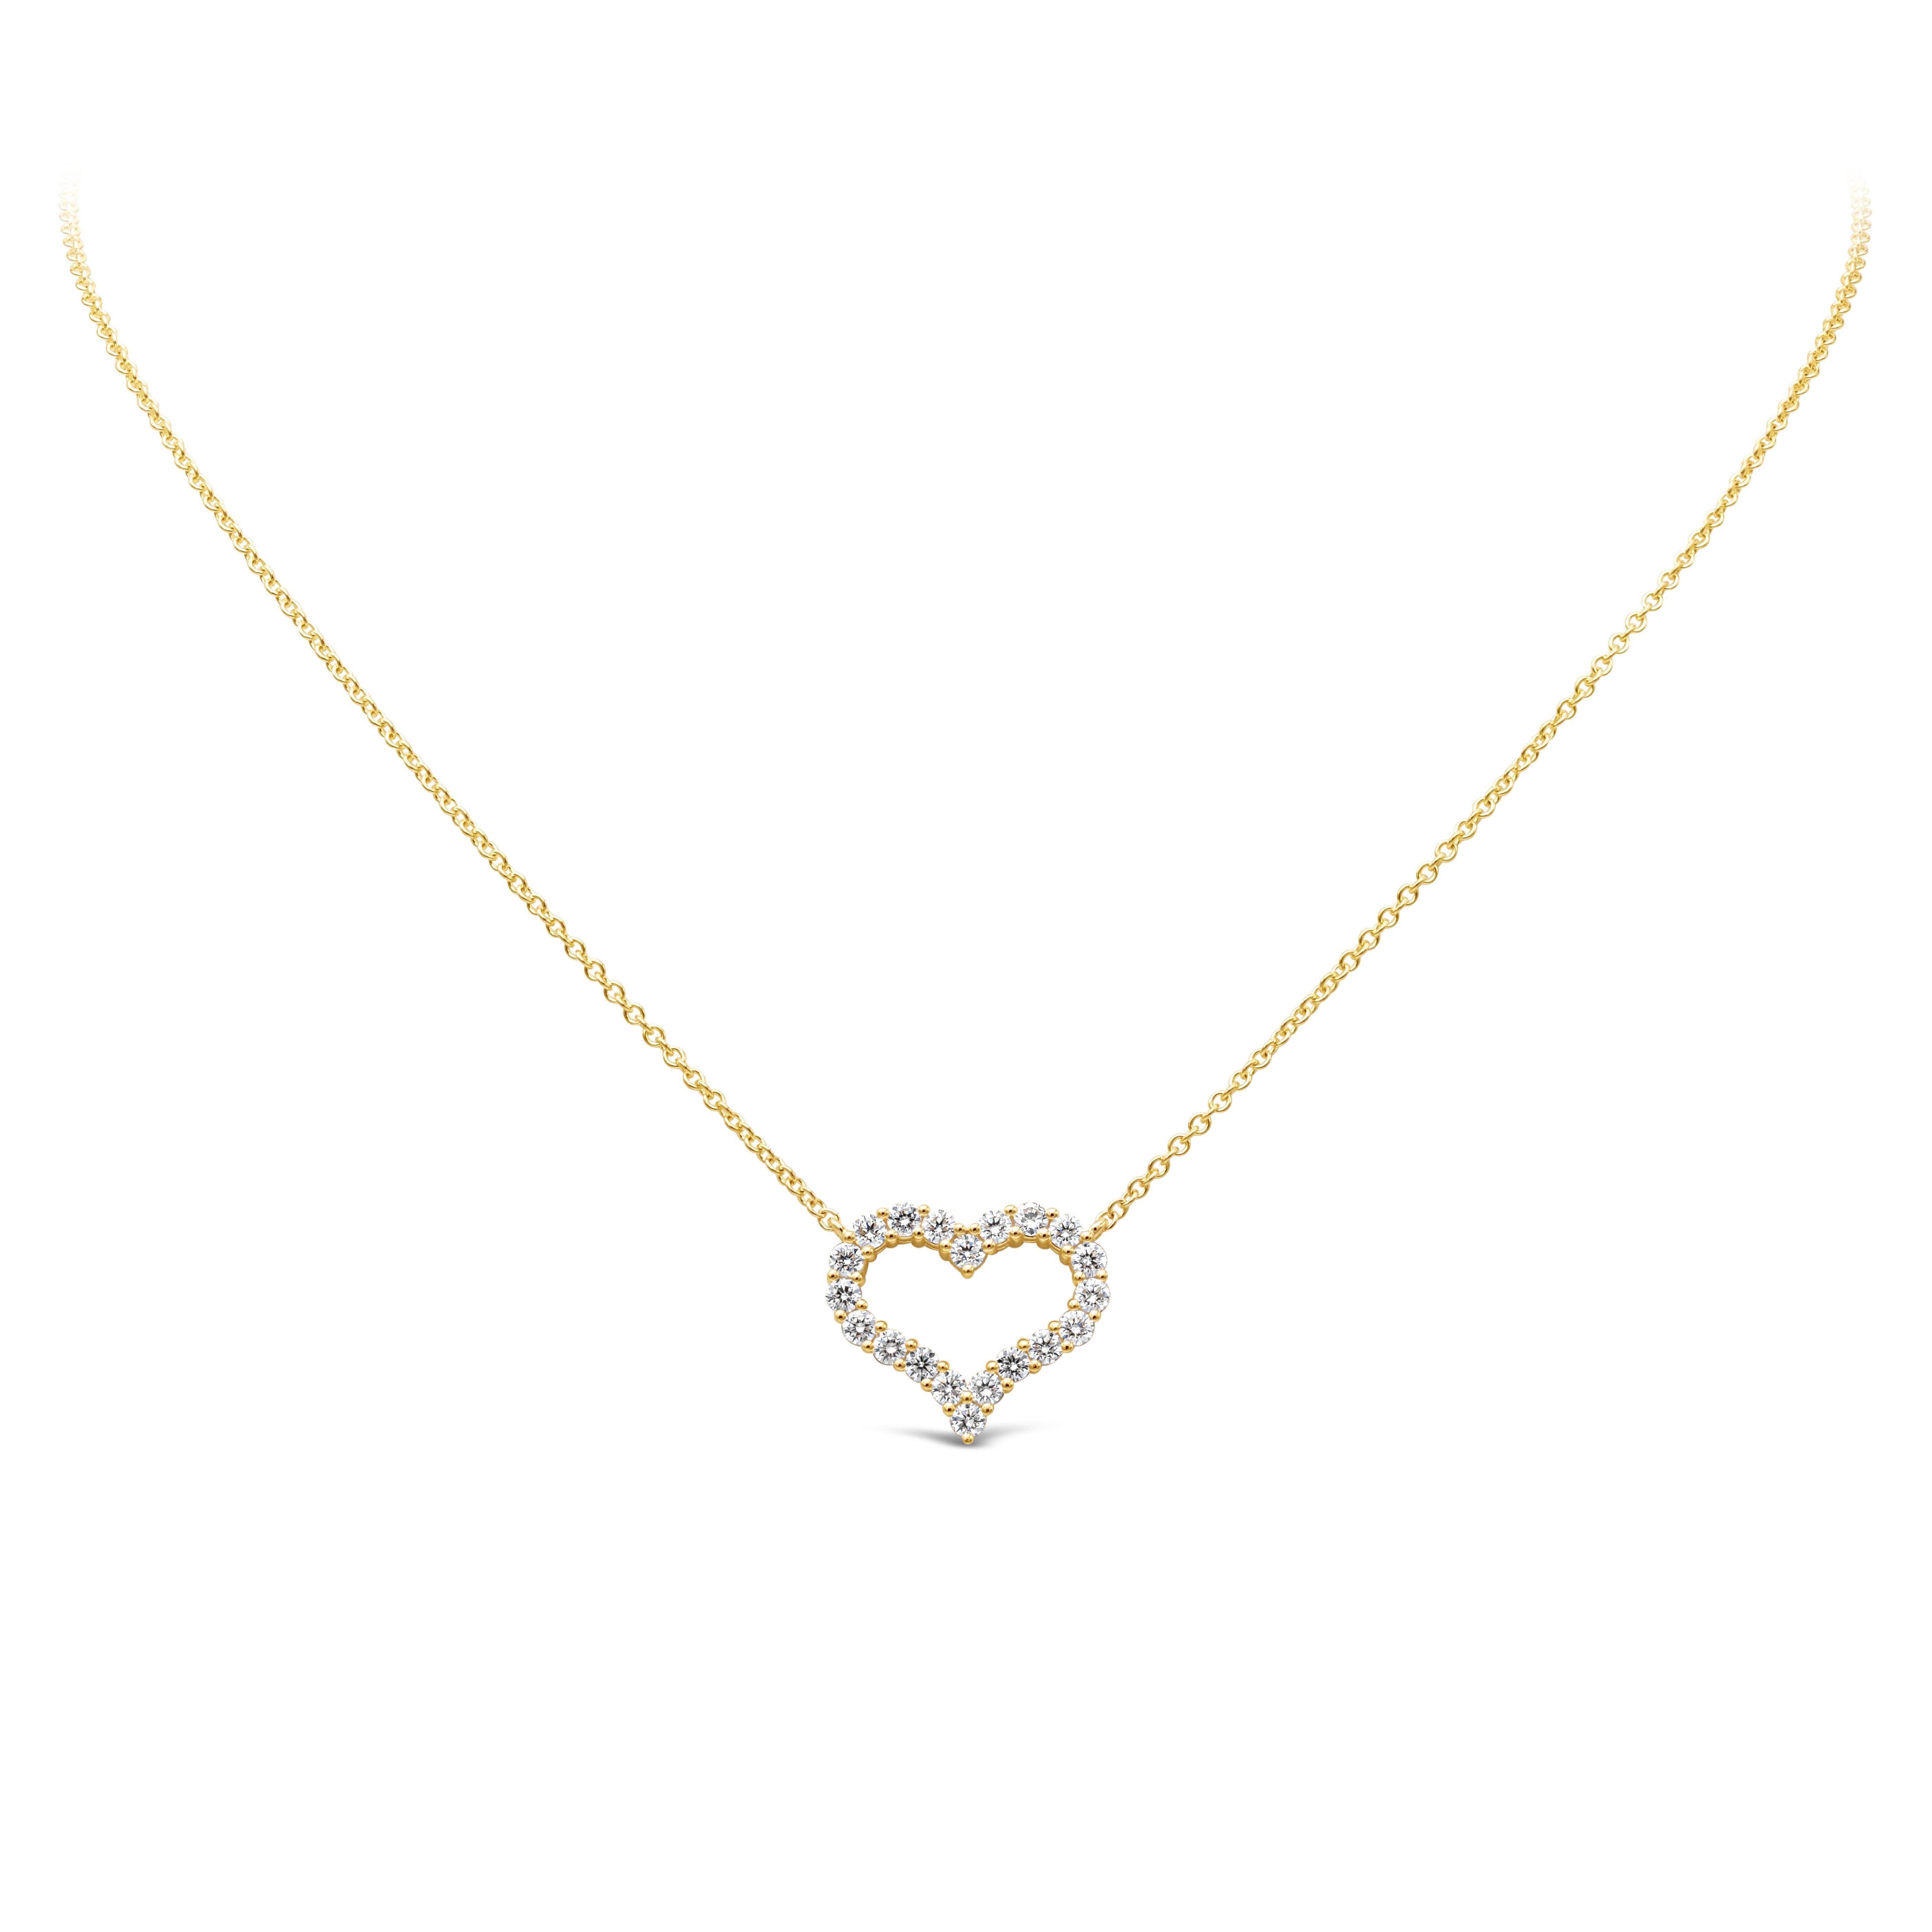 A simple and unique pendant necklace showcasing a row of round brilliant diamonds weighing 1.09 carats total, F color and VS/SI1 in clarity. Set in an open-work heart shape mounting made in 18K yellow gold and shared prong setting. Suspended on an